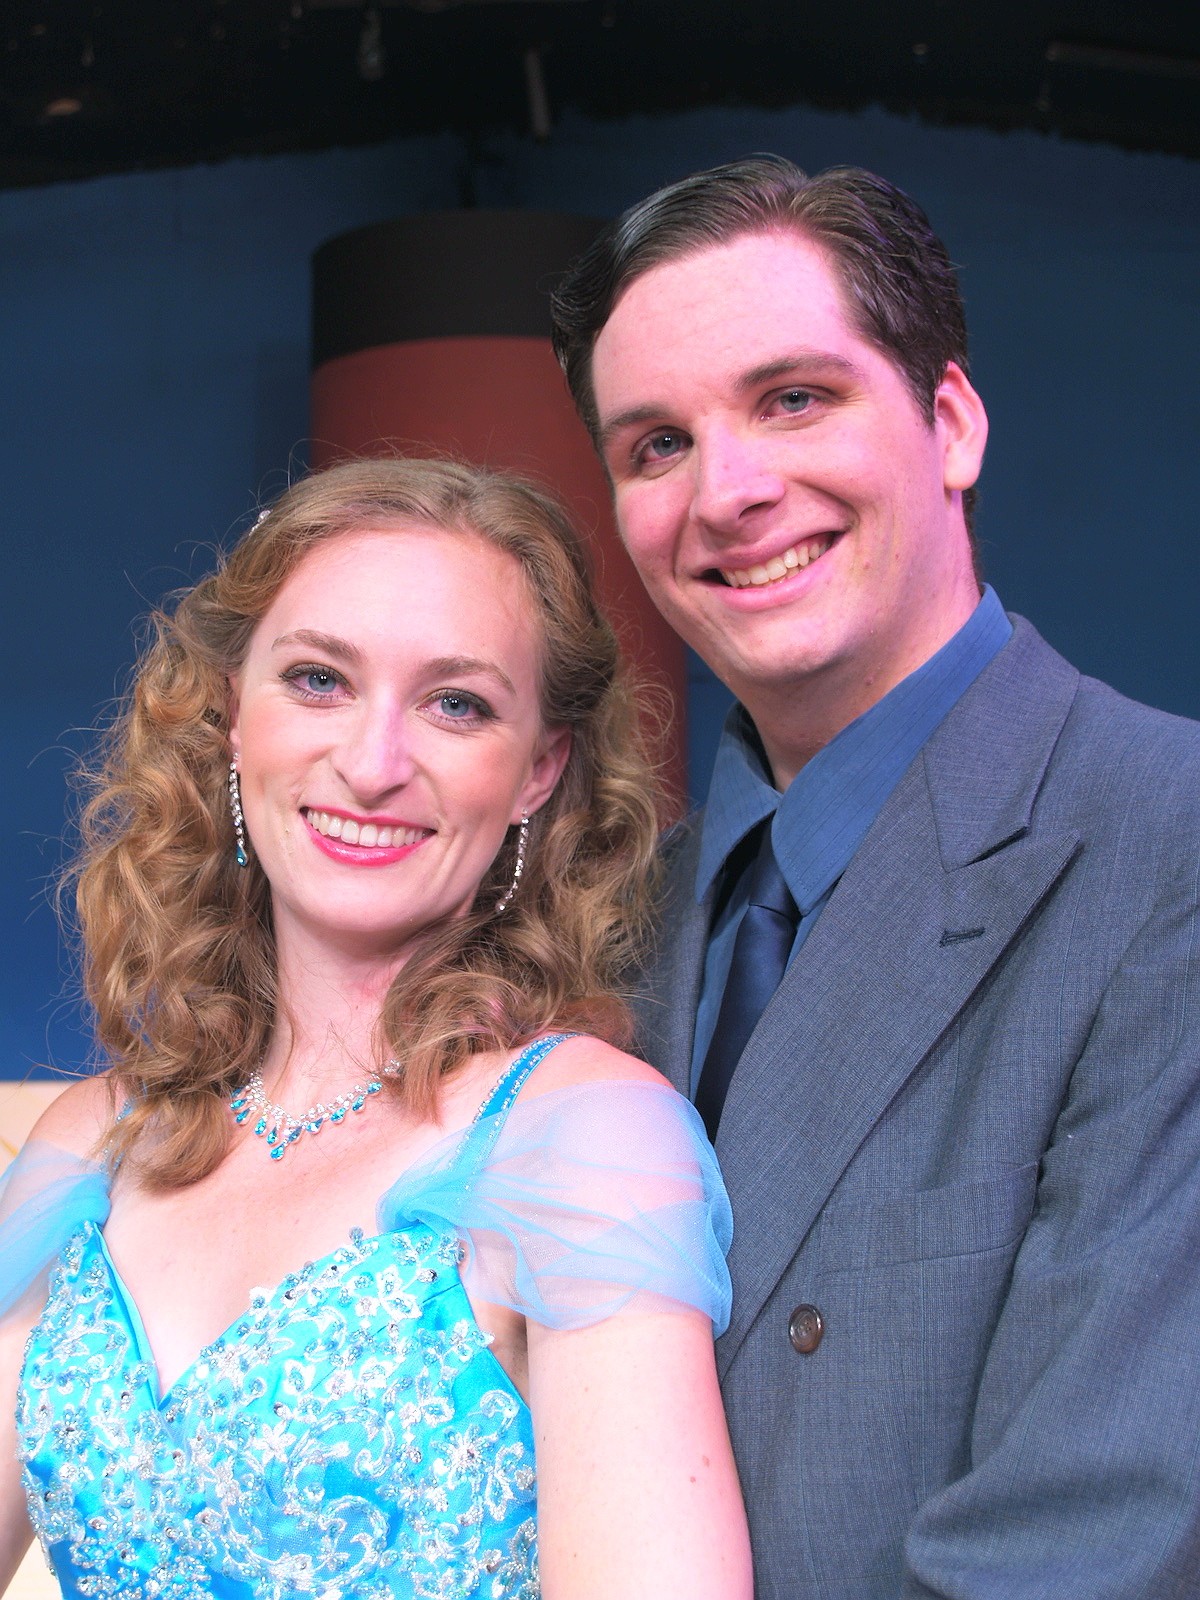 Keili Simmons Marble as Hope and Erik Standifird as Billy in Anything Goes - COURTESY OF NCRT